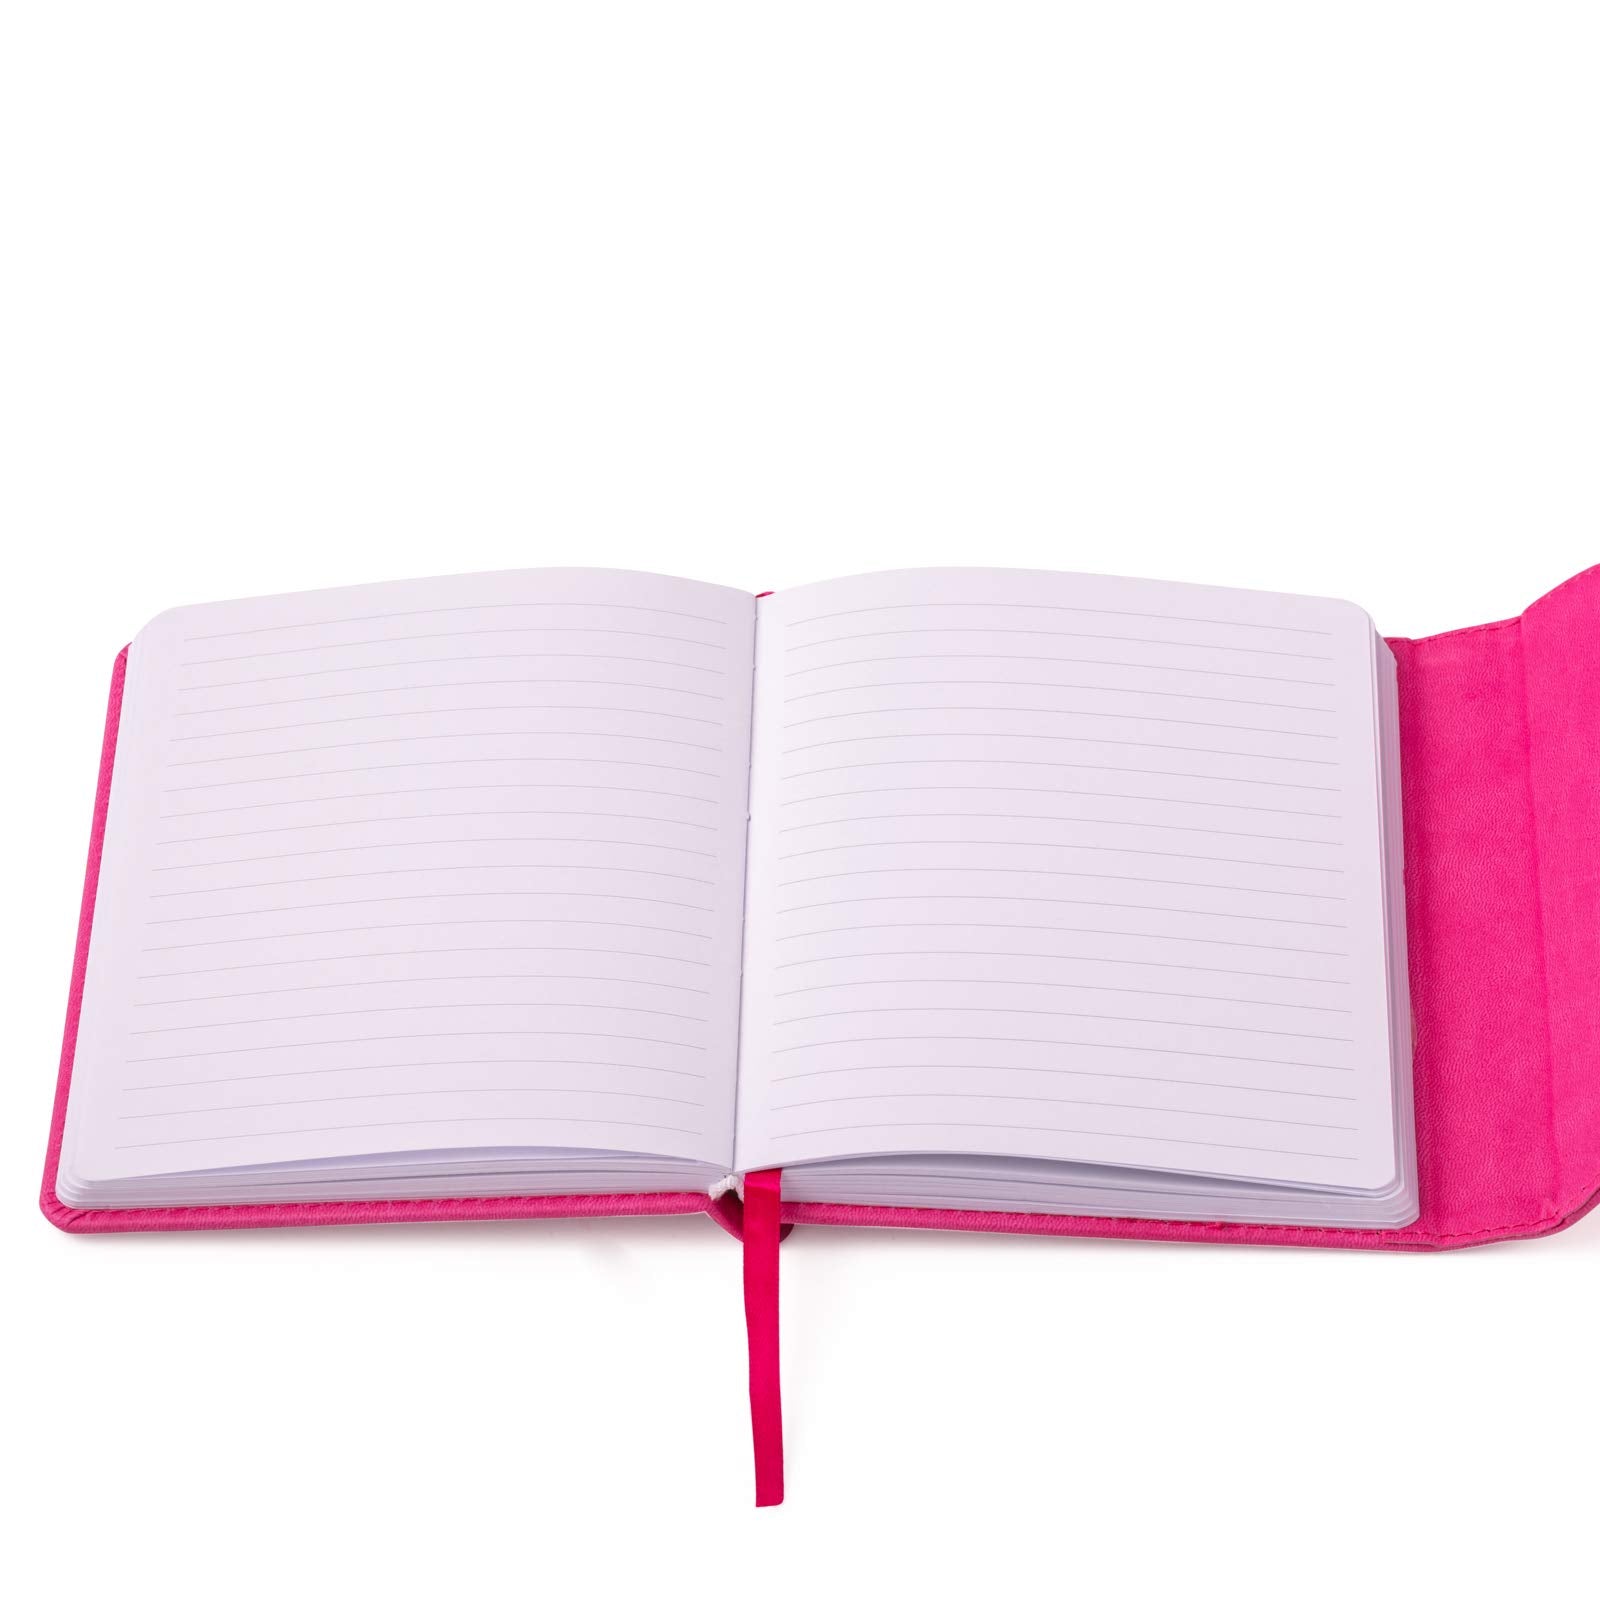 Hot Pink Eccolo Dayna Lee Notebook From The Heart